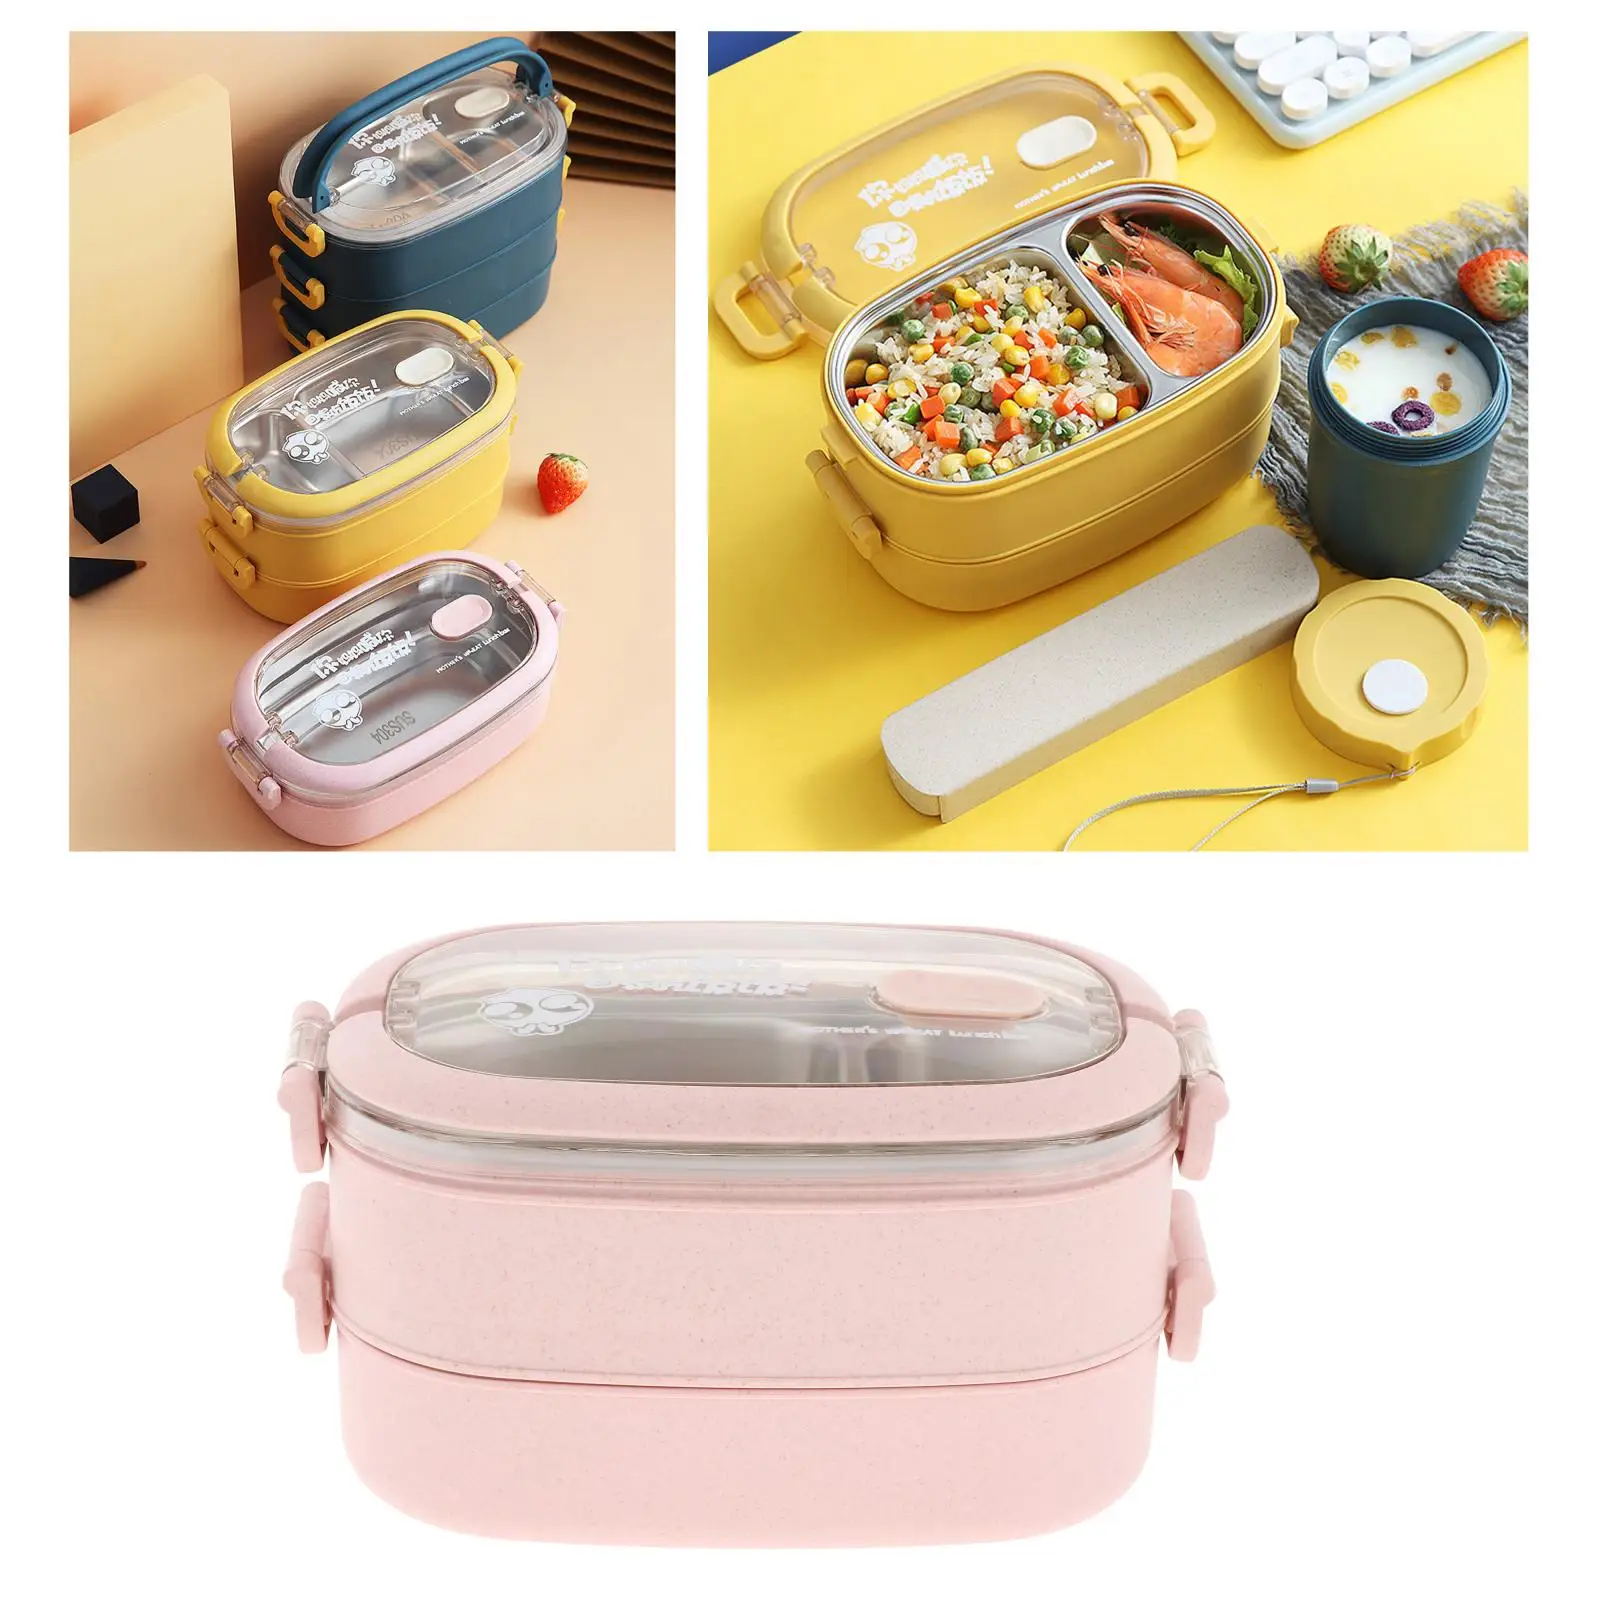 Portable Wood Travel Lunch Box Outdoor Picnic Bento Food Storage Container Case 